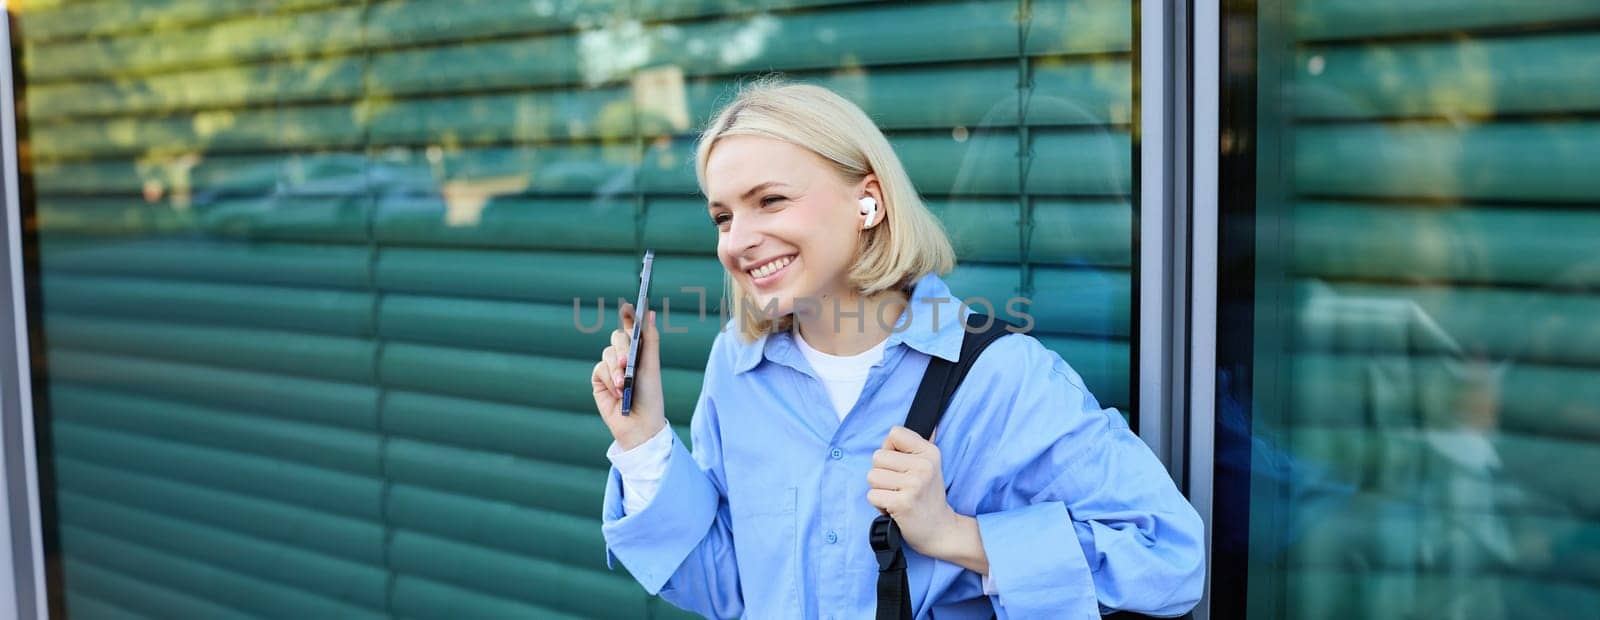 Close up portrait of blond smiling female model, college student in earphones, listening to music on street, holding smartphone, waiting for someone outdoors.